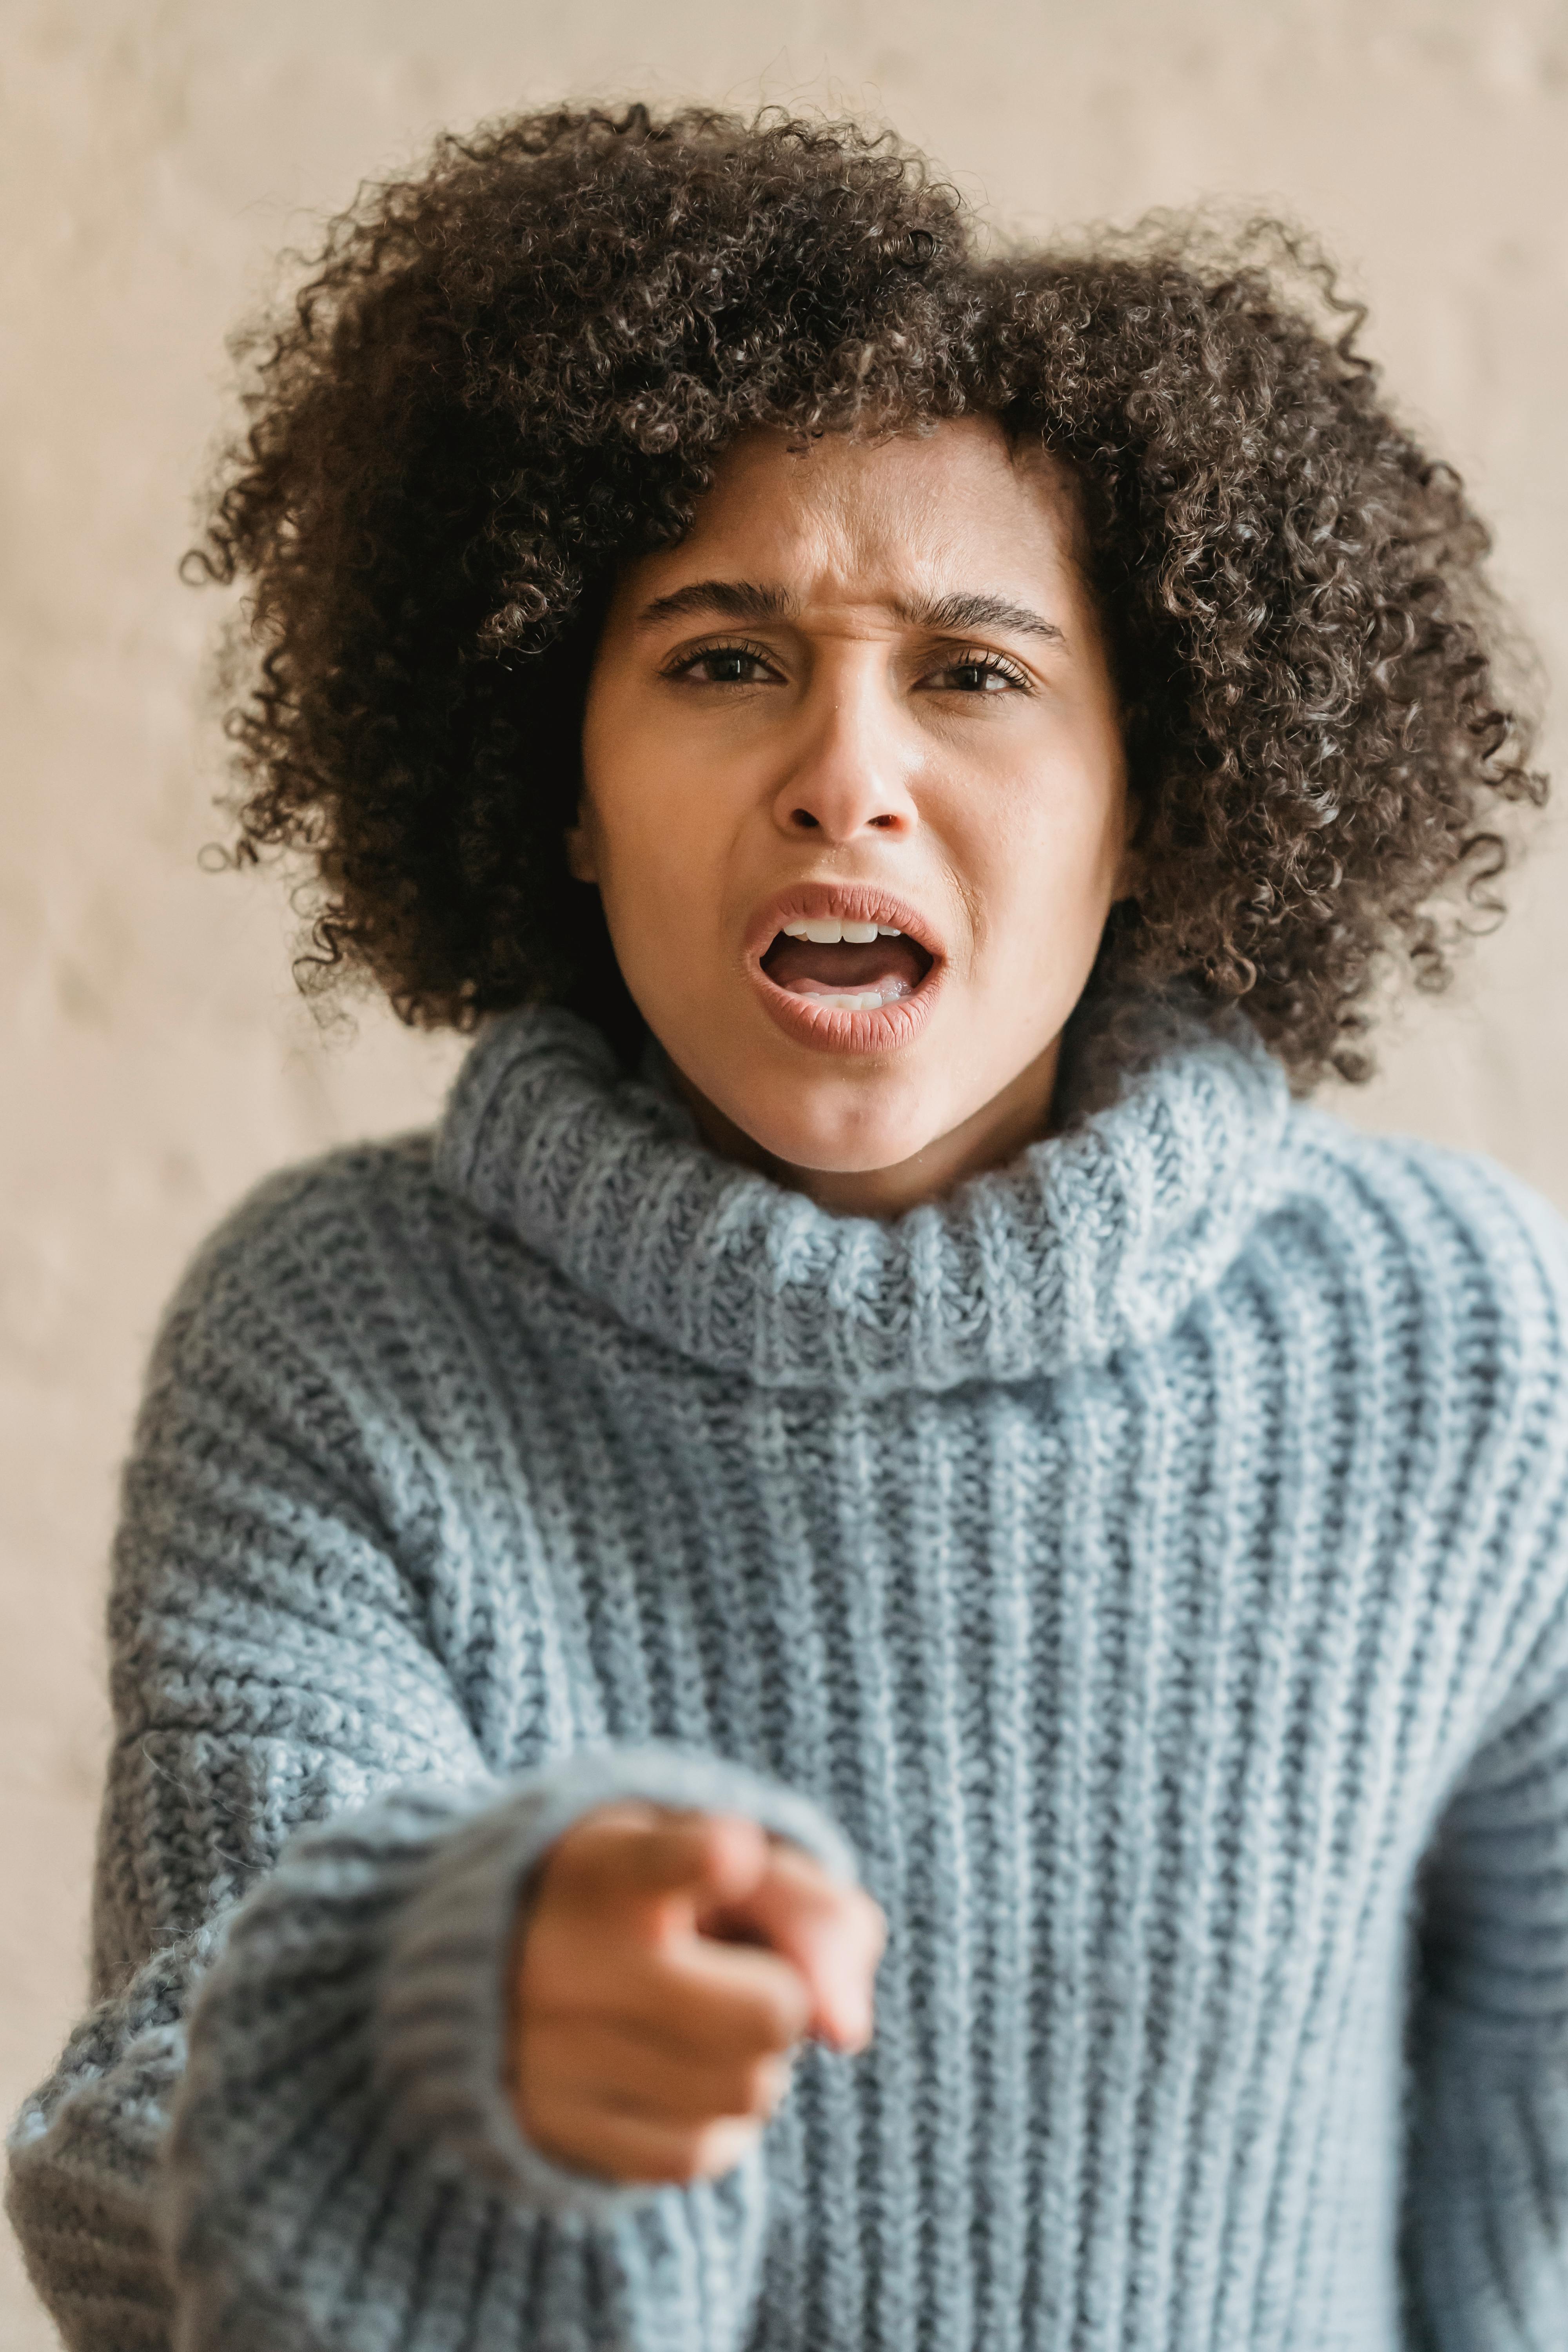 An angry woman gesticulating | Source: Pexels